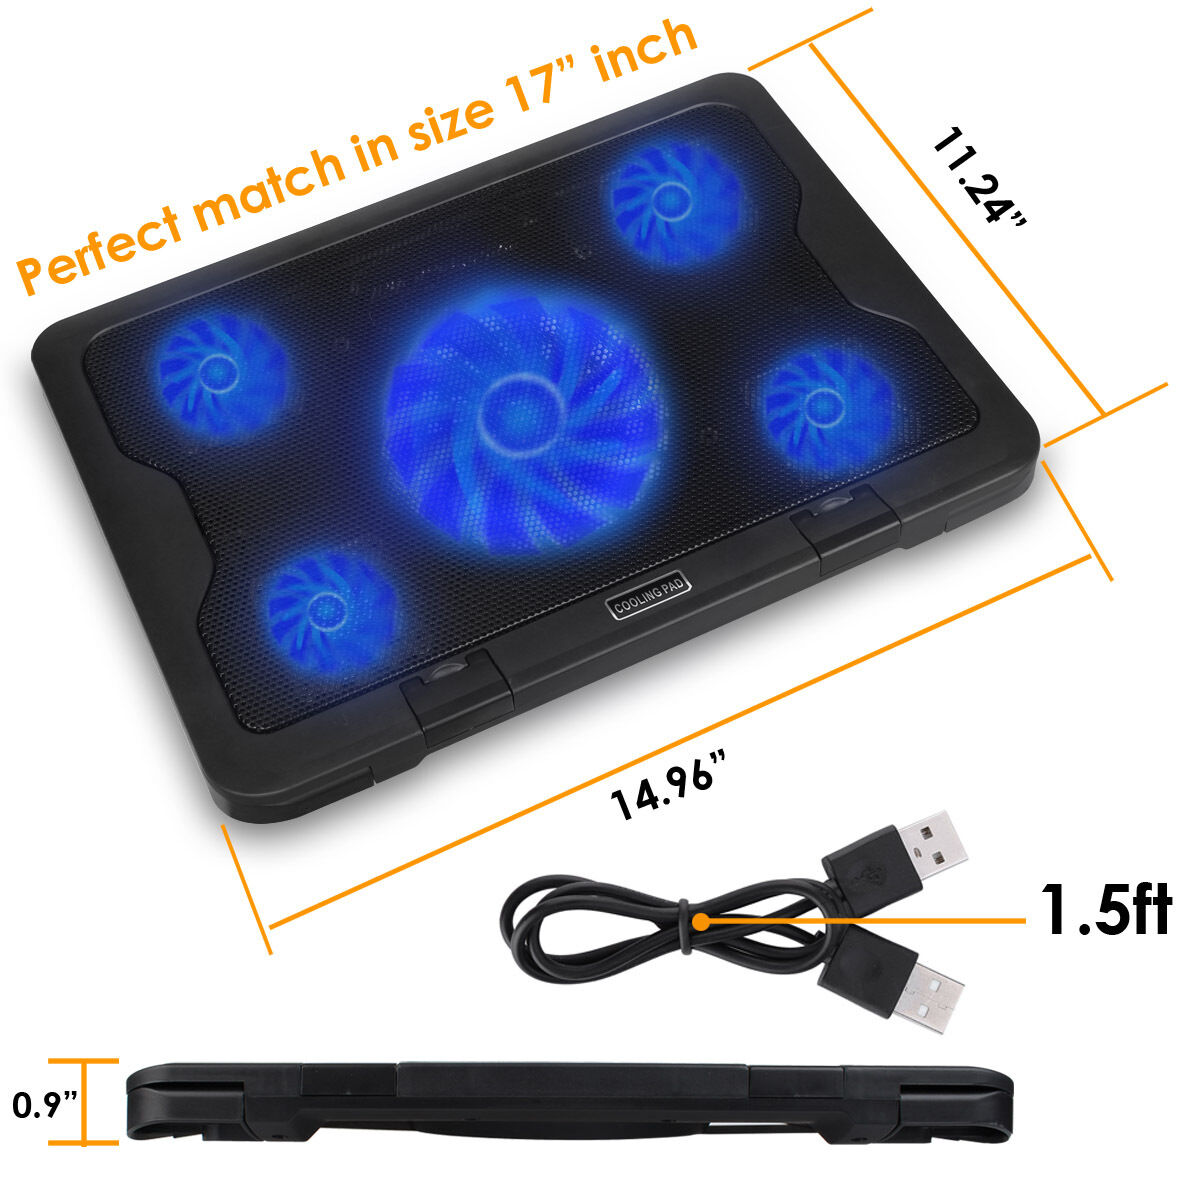 5 Fans Blue LED 2 USB Port Cooling Stand Pad Cooler For 12"-17" Laptop Notebook YELLOW-PRICE Does Not Apply - фотография #12